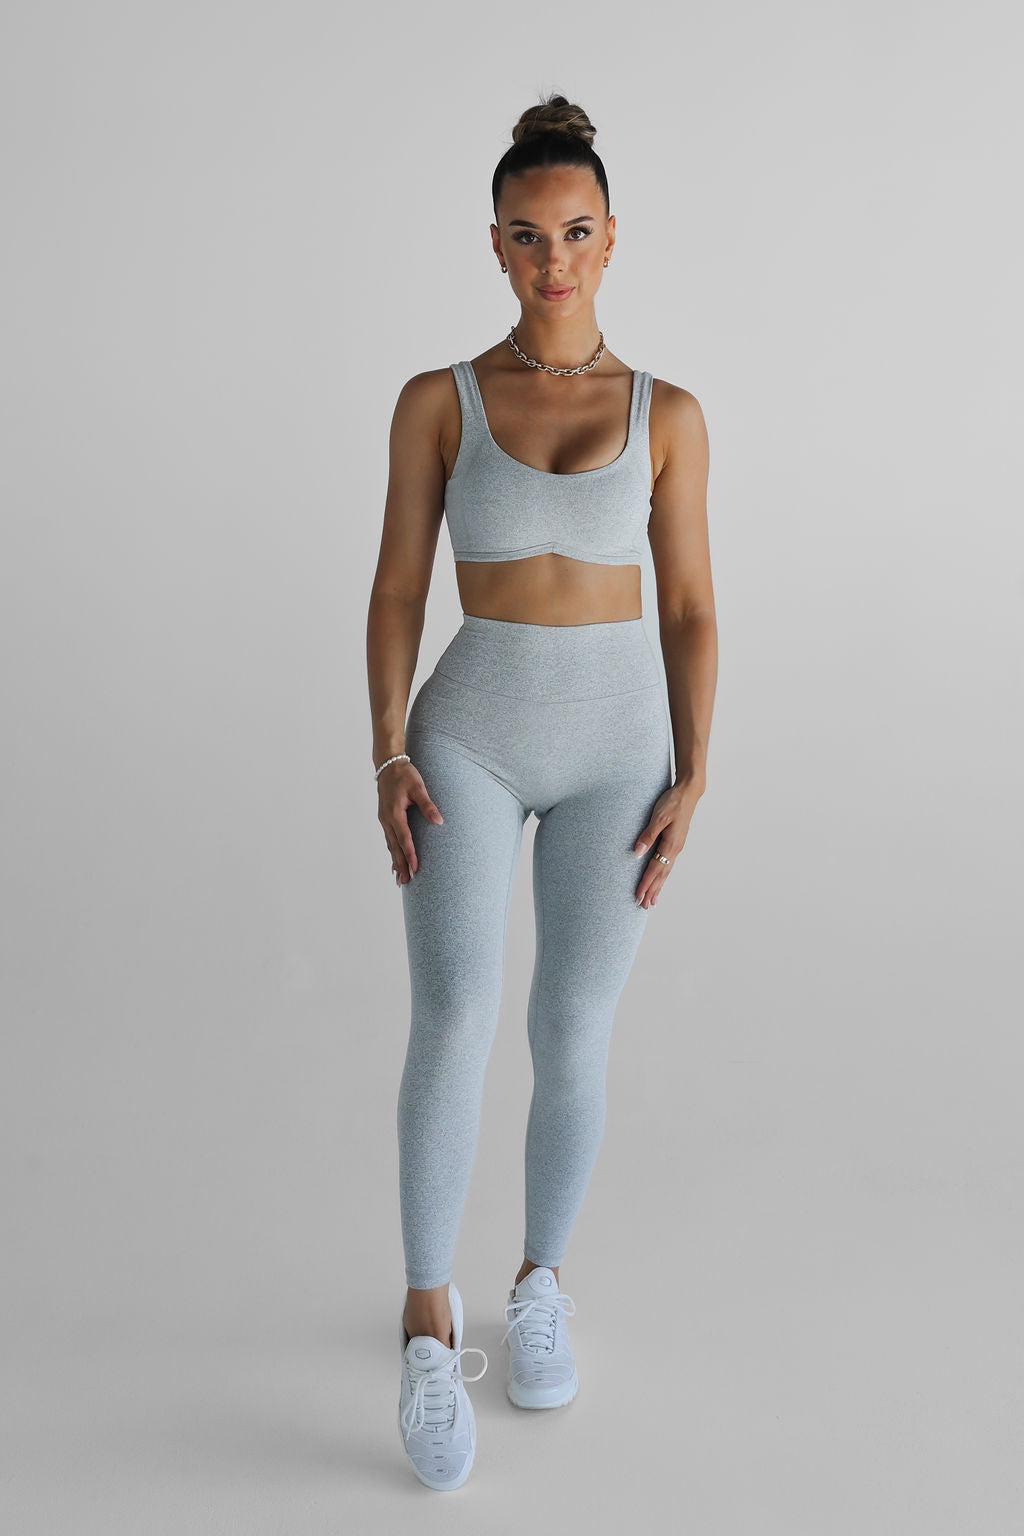 Signature Full Length Leggings - Marl Grey, High Waisted, Squat Proof, 5  Star Rated